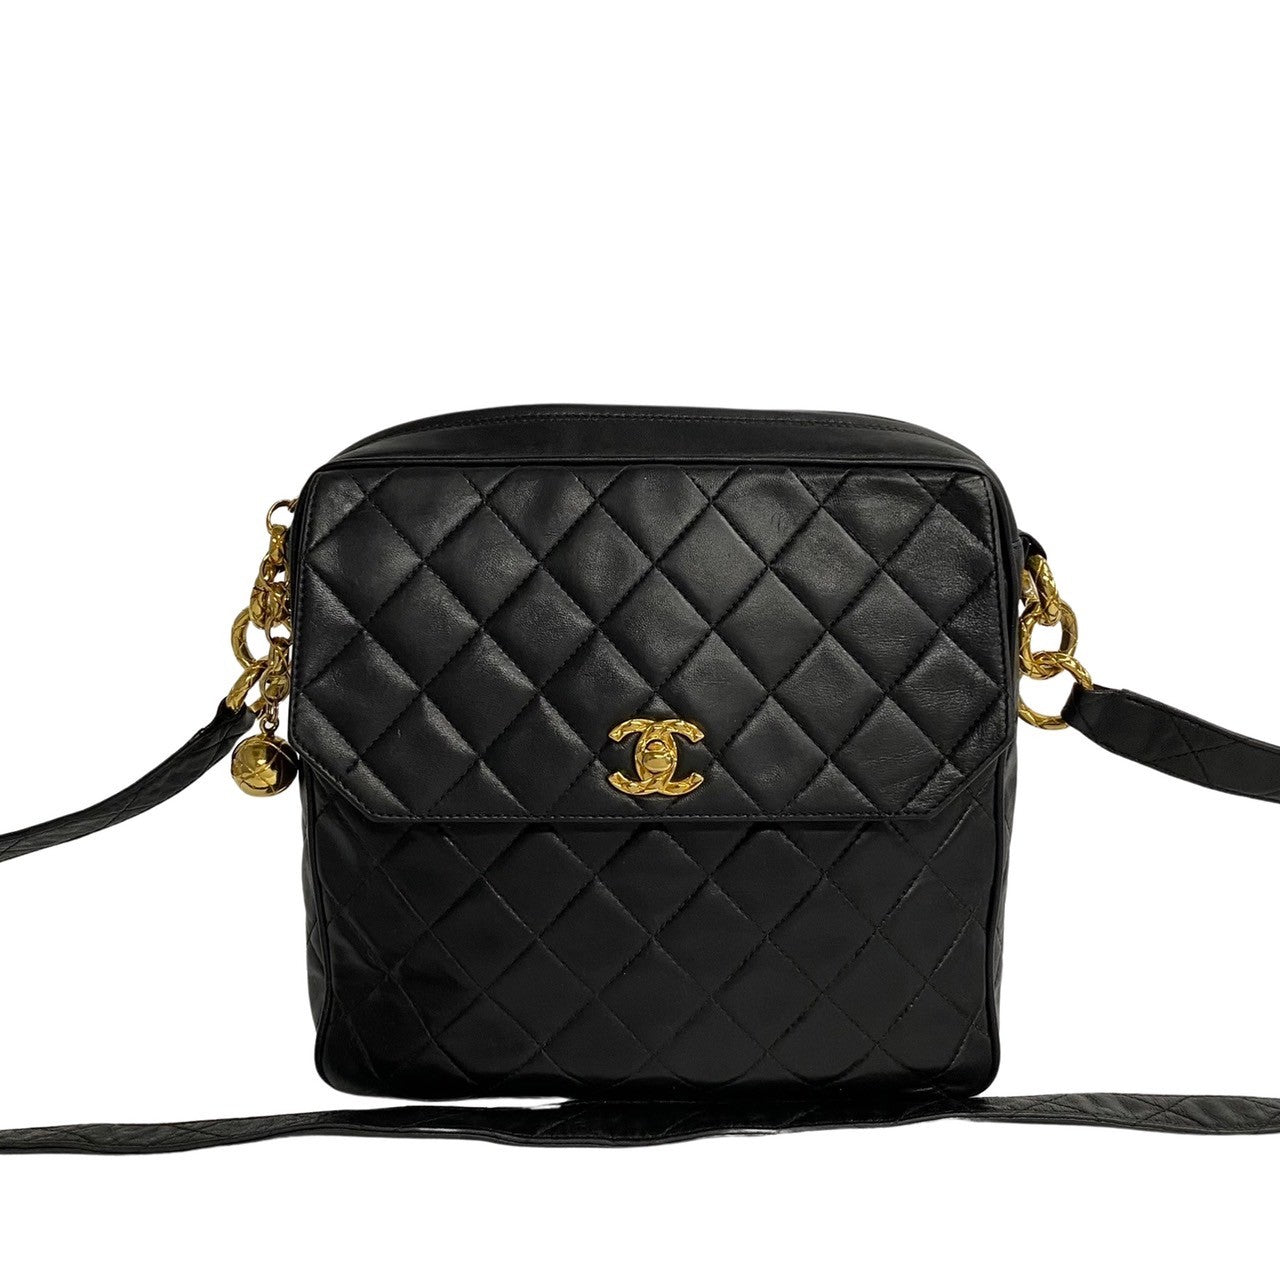 Chanel CC Quilted Leather Zip Messenger Bag Leather Crossbody Bag in Good condition